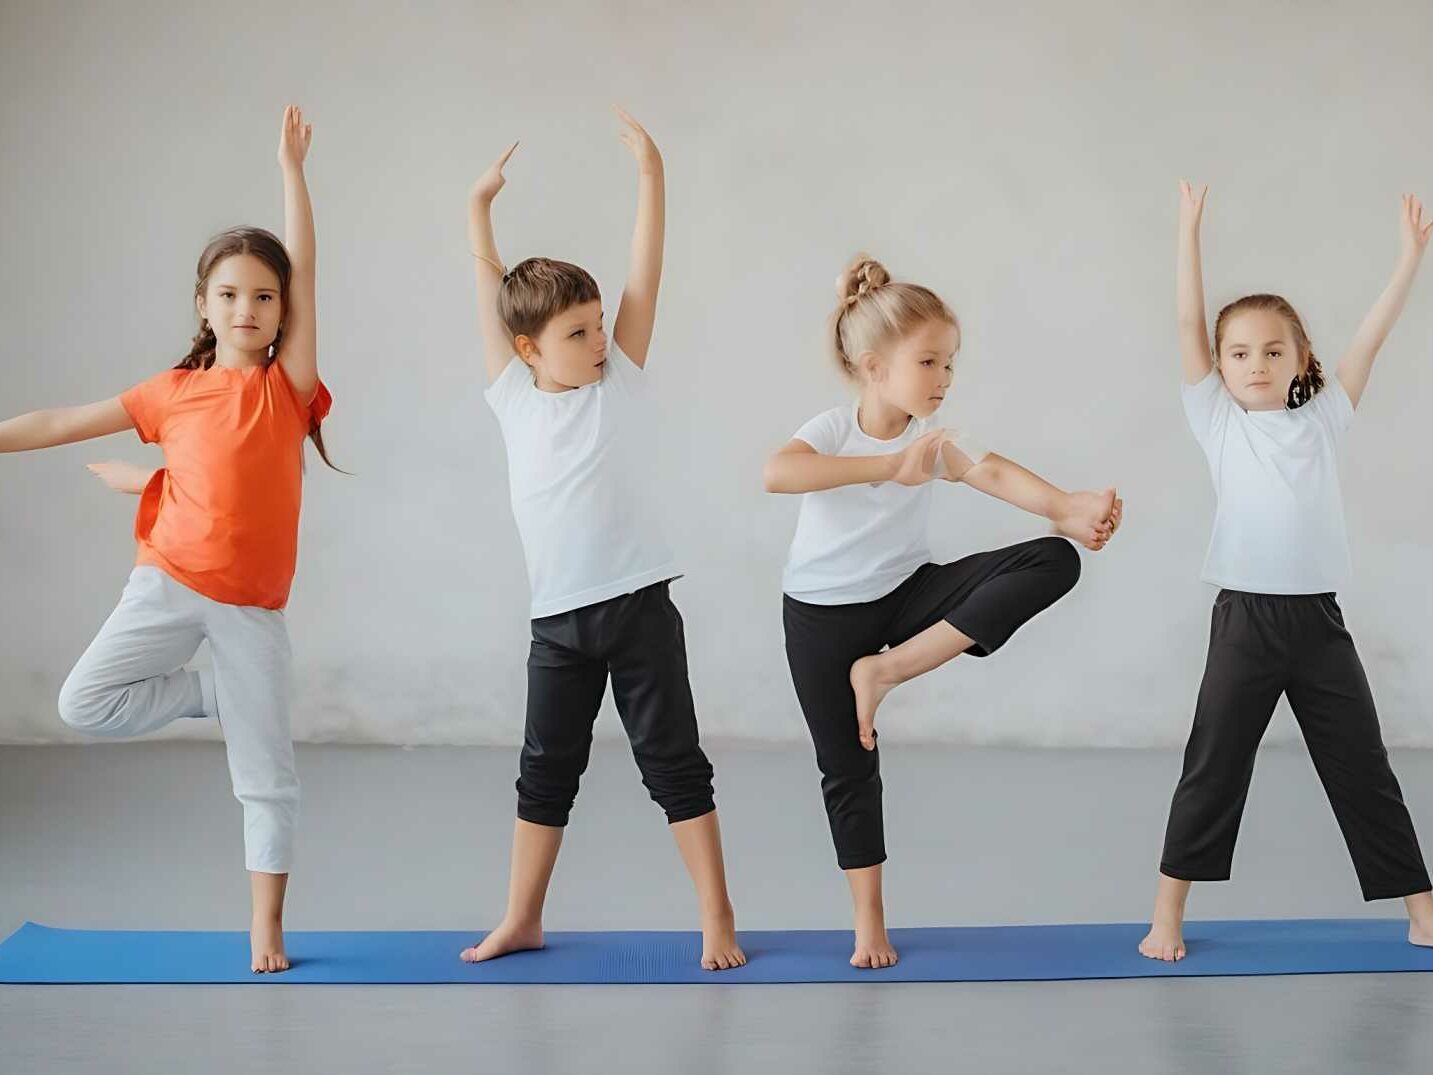 Smiling children engaging in playful yoga and martial arts activities